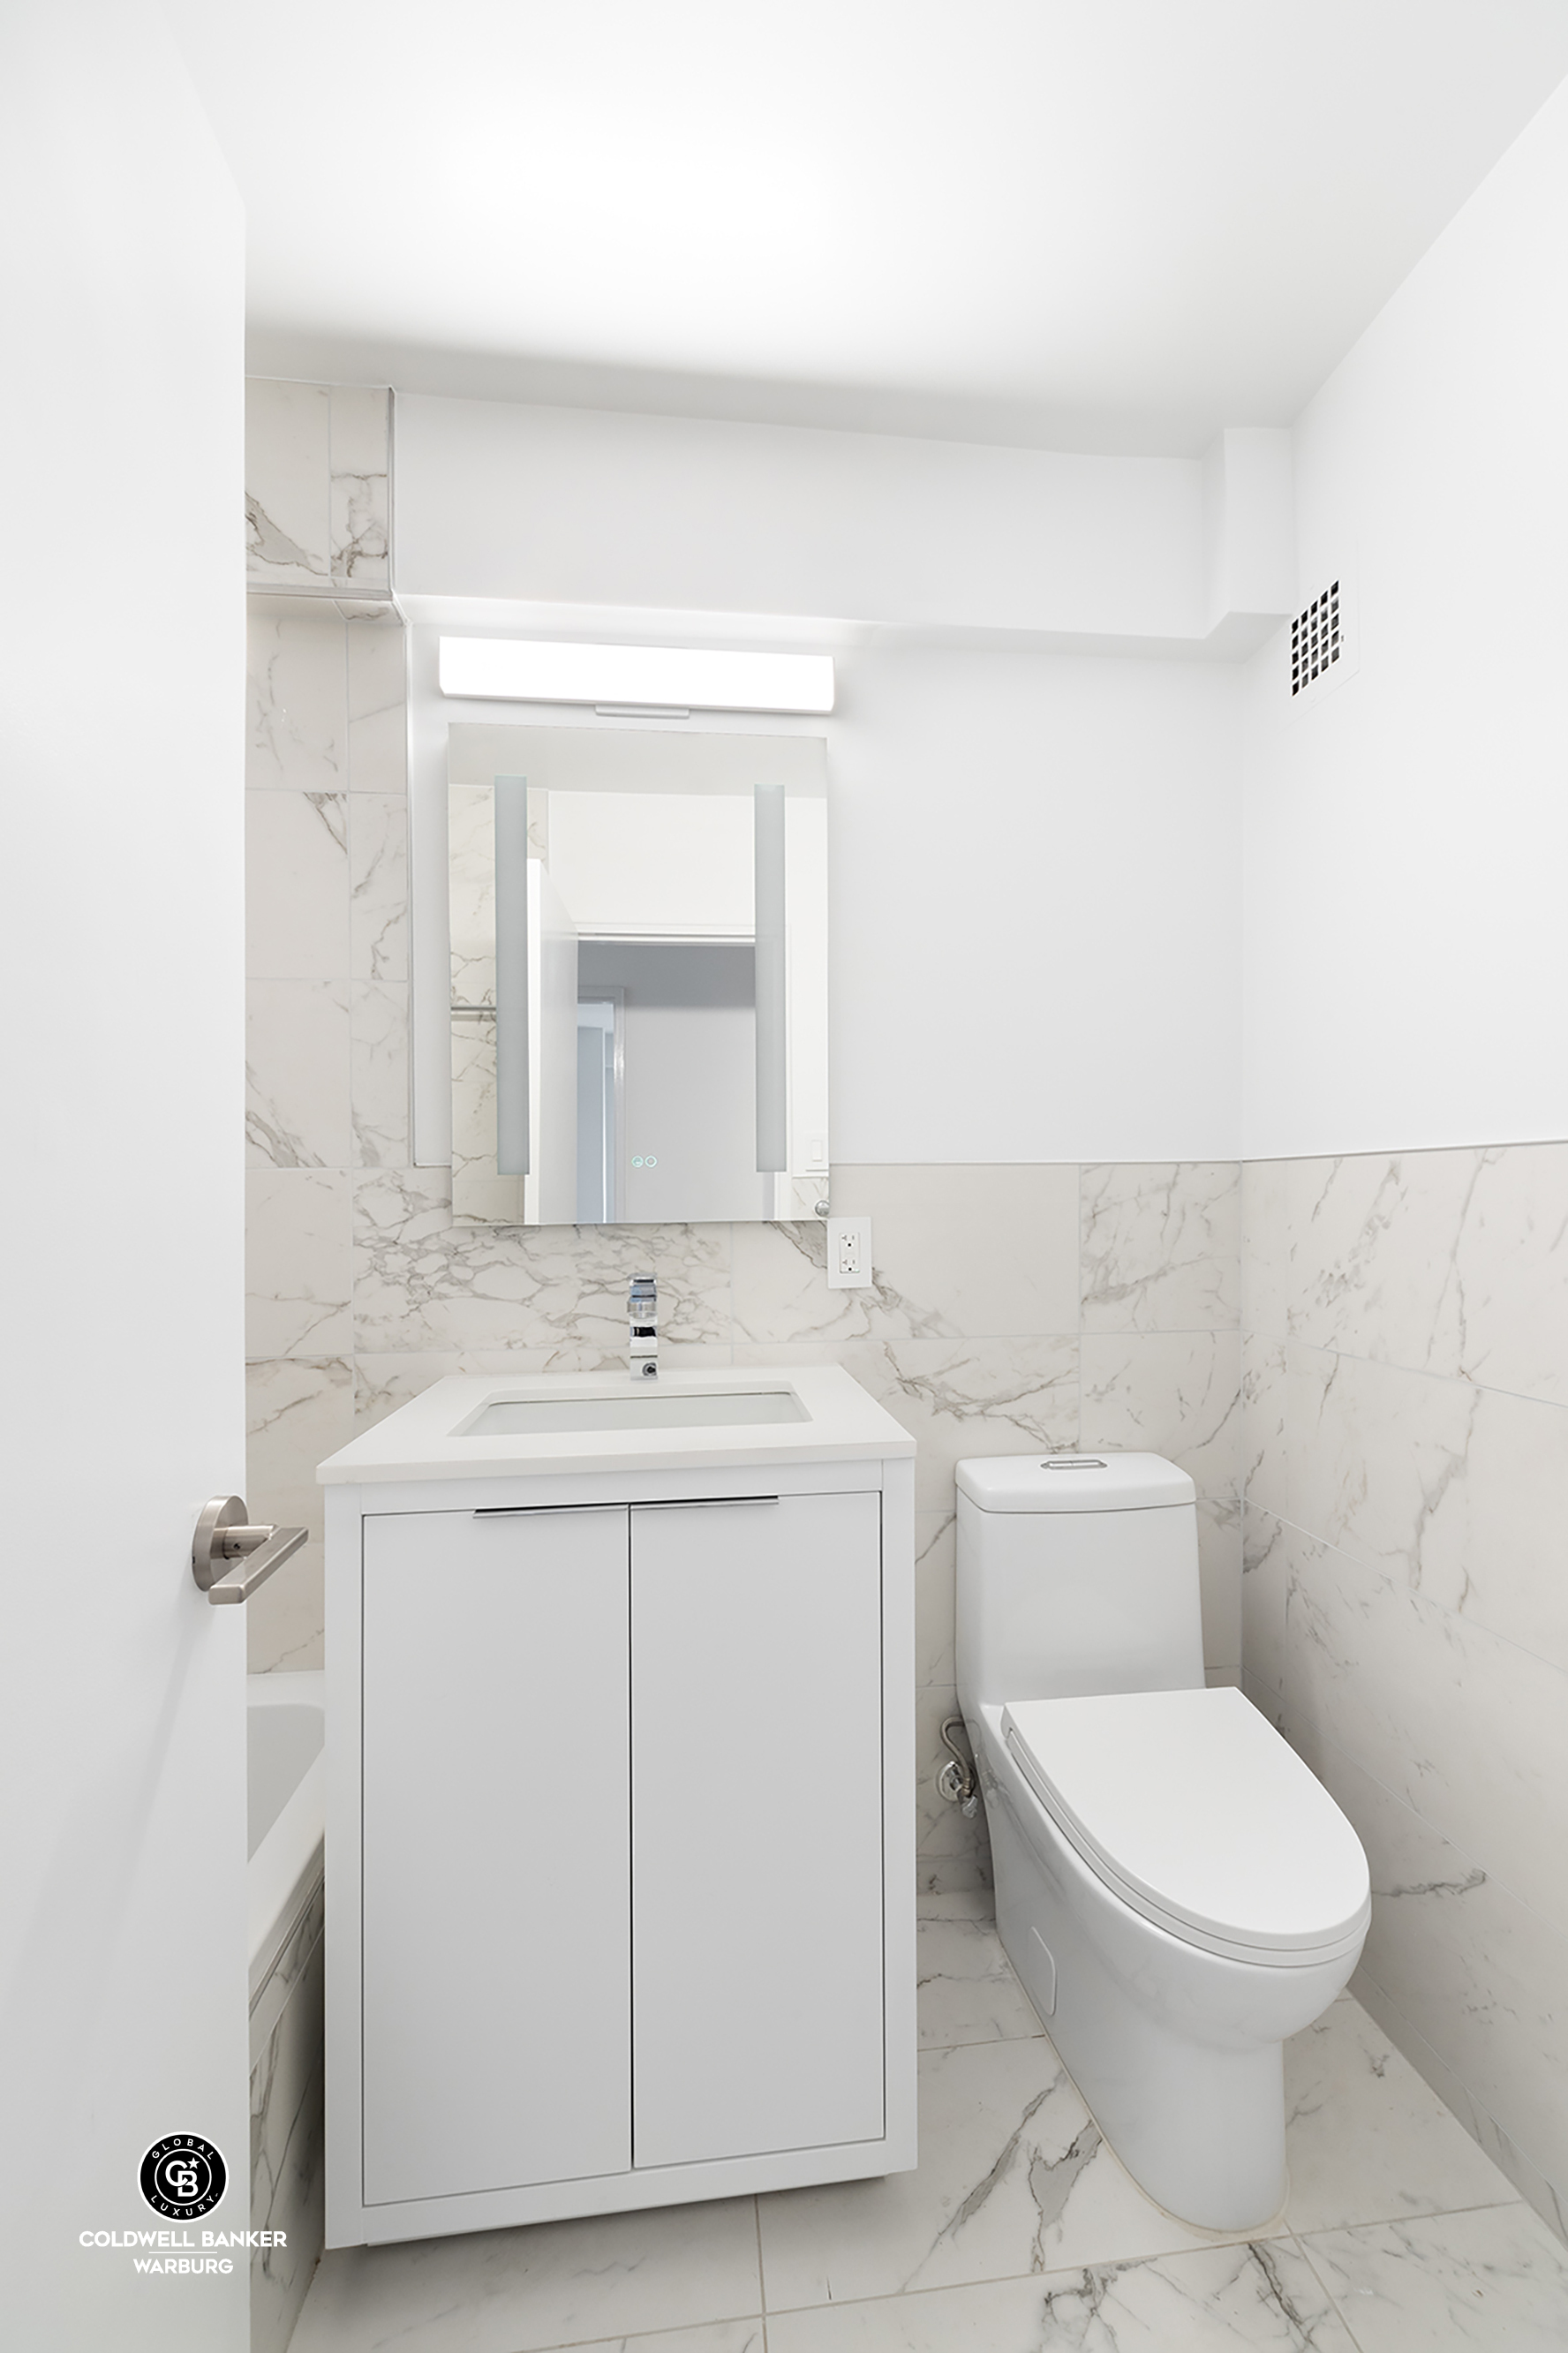 245 E 35th Street Unit 7H, New York, New York, 10016, United States, 1 Bedroom Bedrooms, ,1 BathroomBathrooms,Residential,For Sale,245 e 35th ST unit 7h,1491622